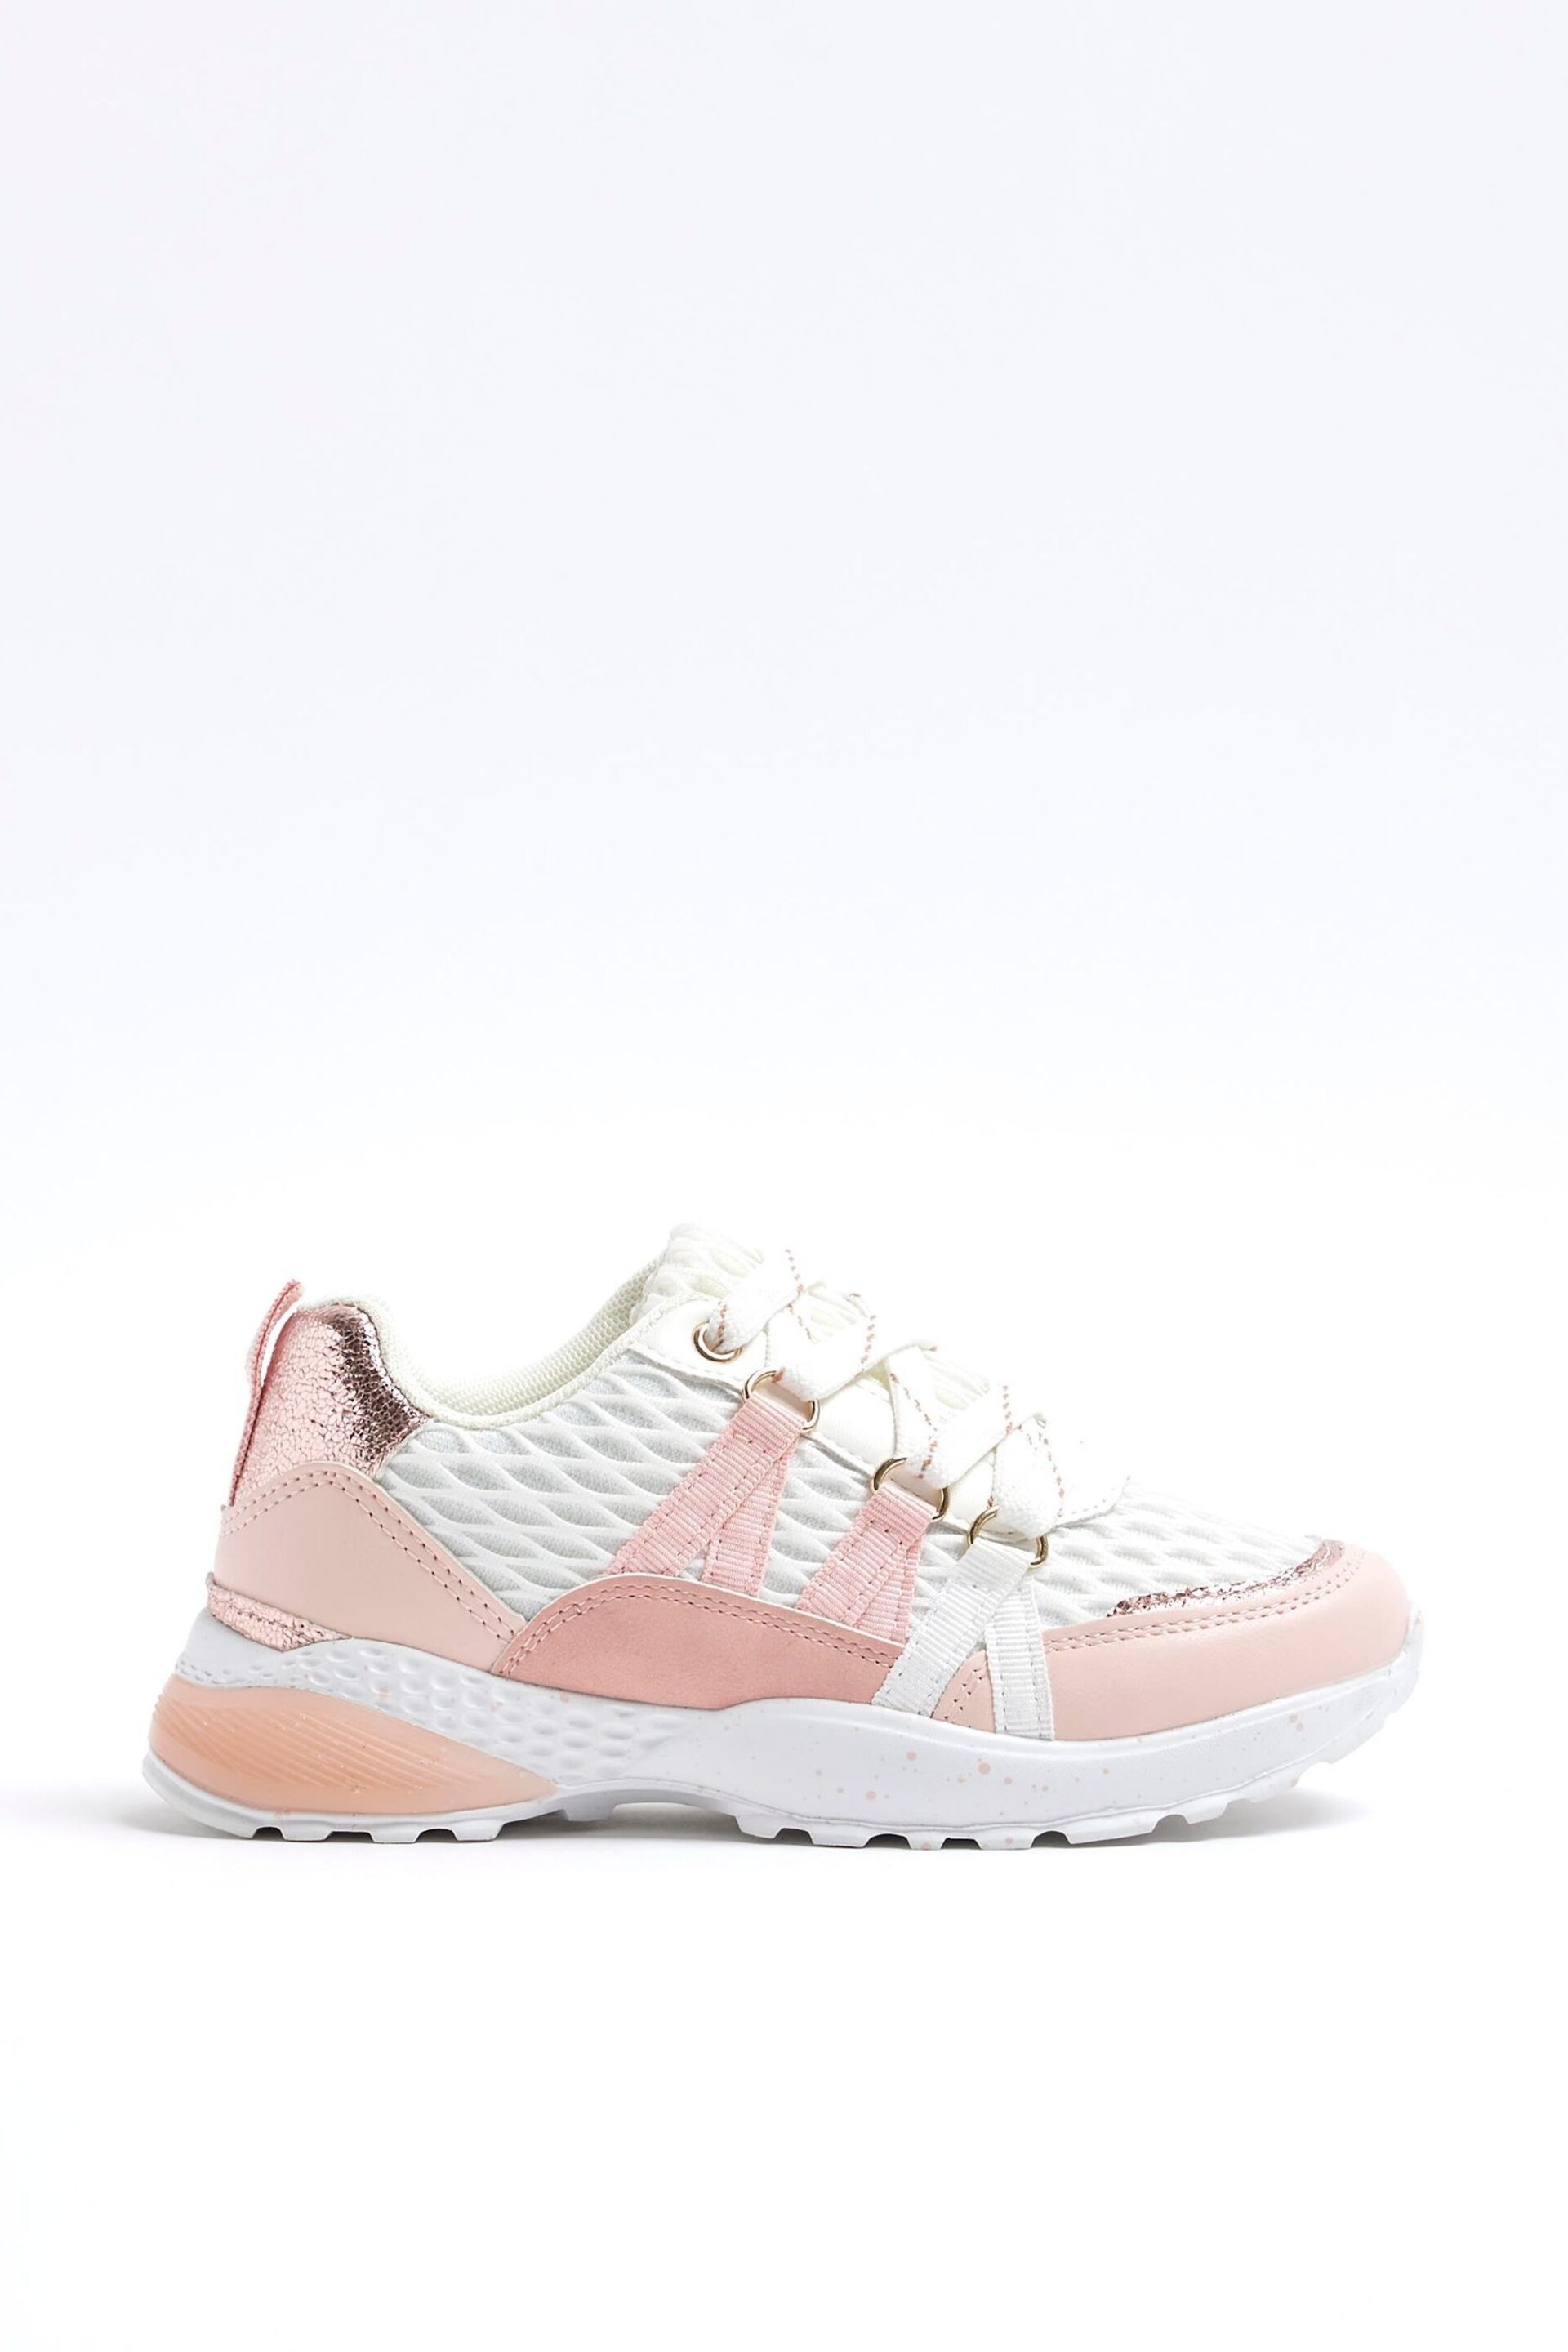 River Island Pink Girls Speckled Sole Trainers - Image 1 of 4